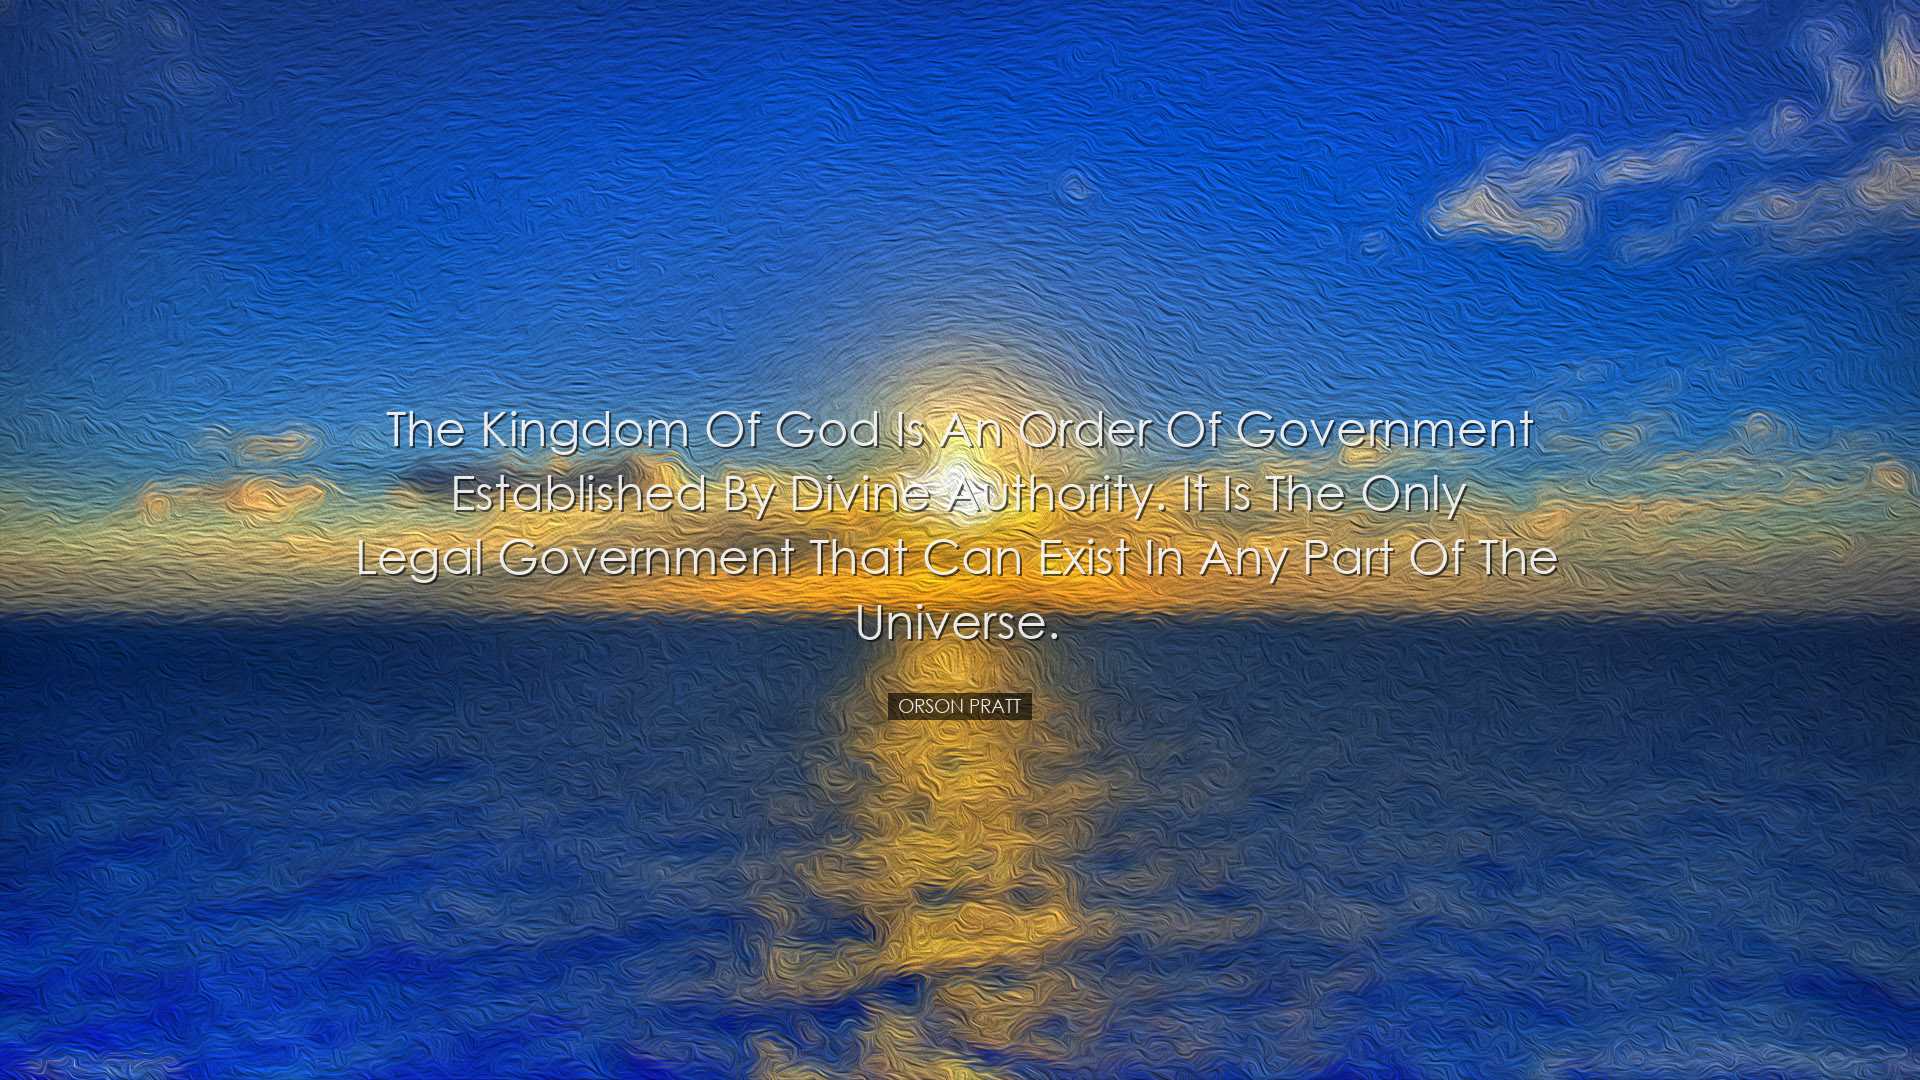 The kingdom of God is an order of government established by divine